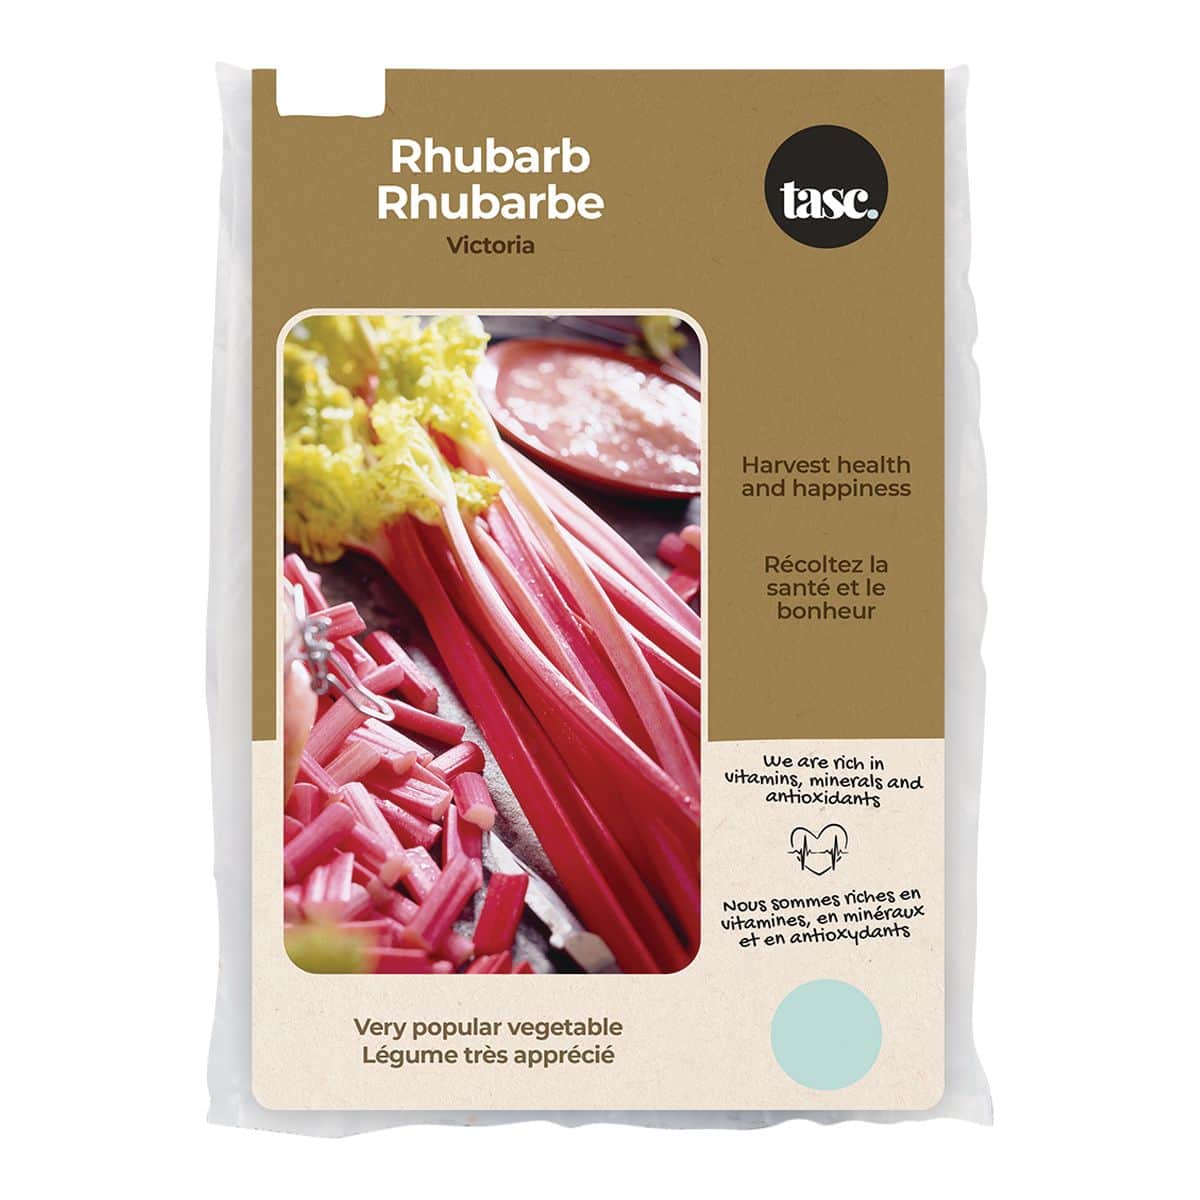 Rhubarb an easy and tasty addition to any garden - The Chilliwack Progress